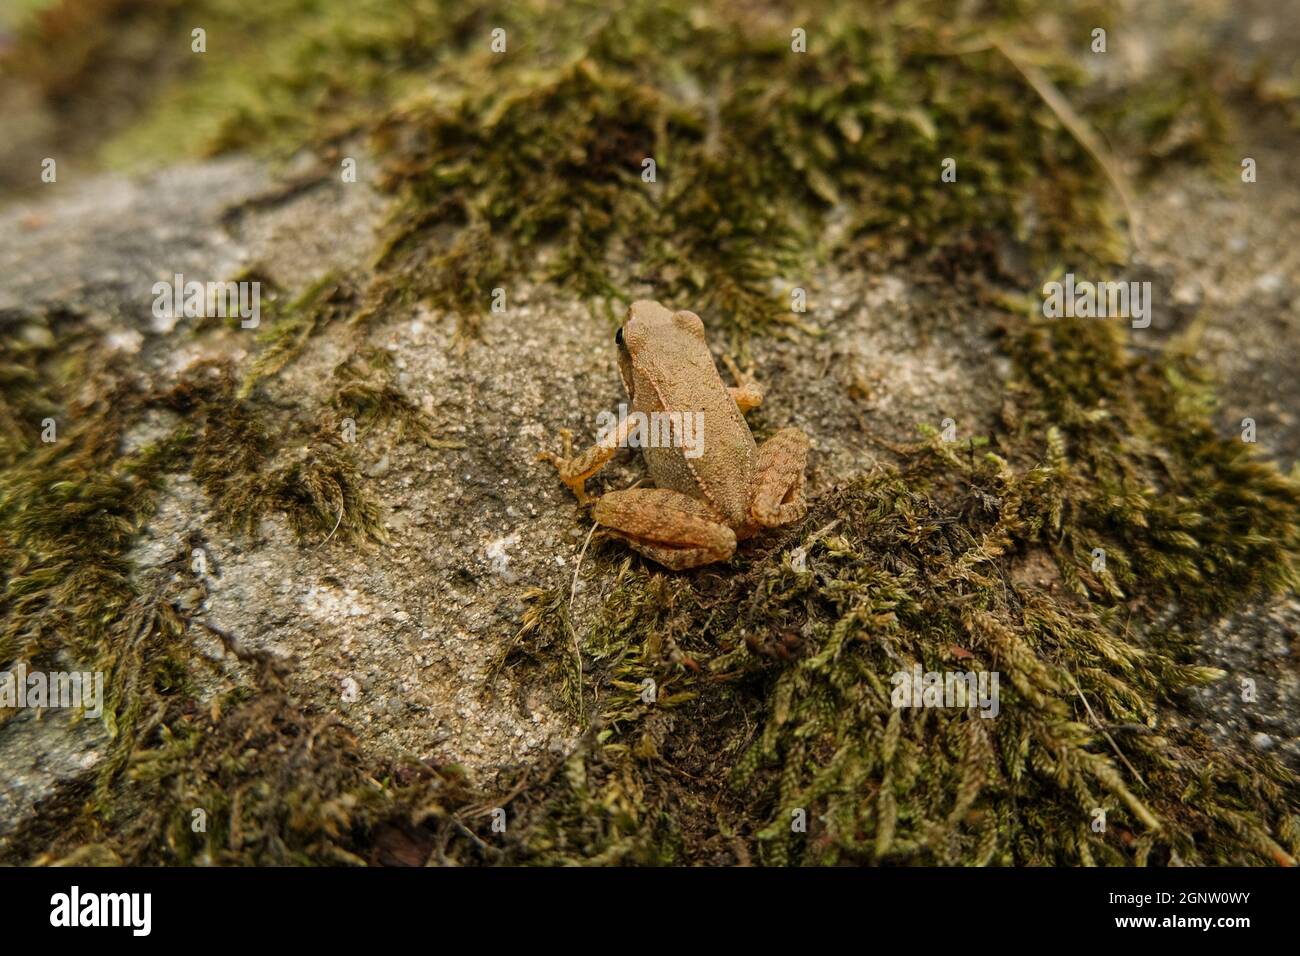 Wild frog close up view while resting on forest ecosystem,amphibian animals Stock Photo